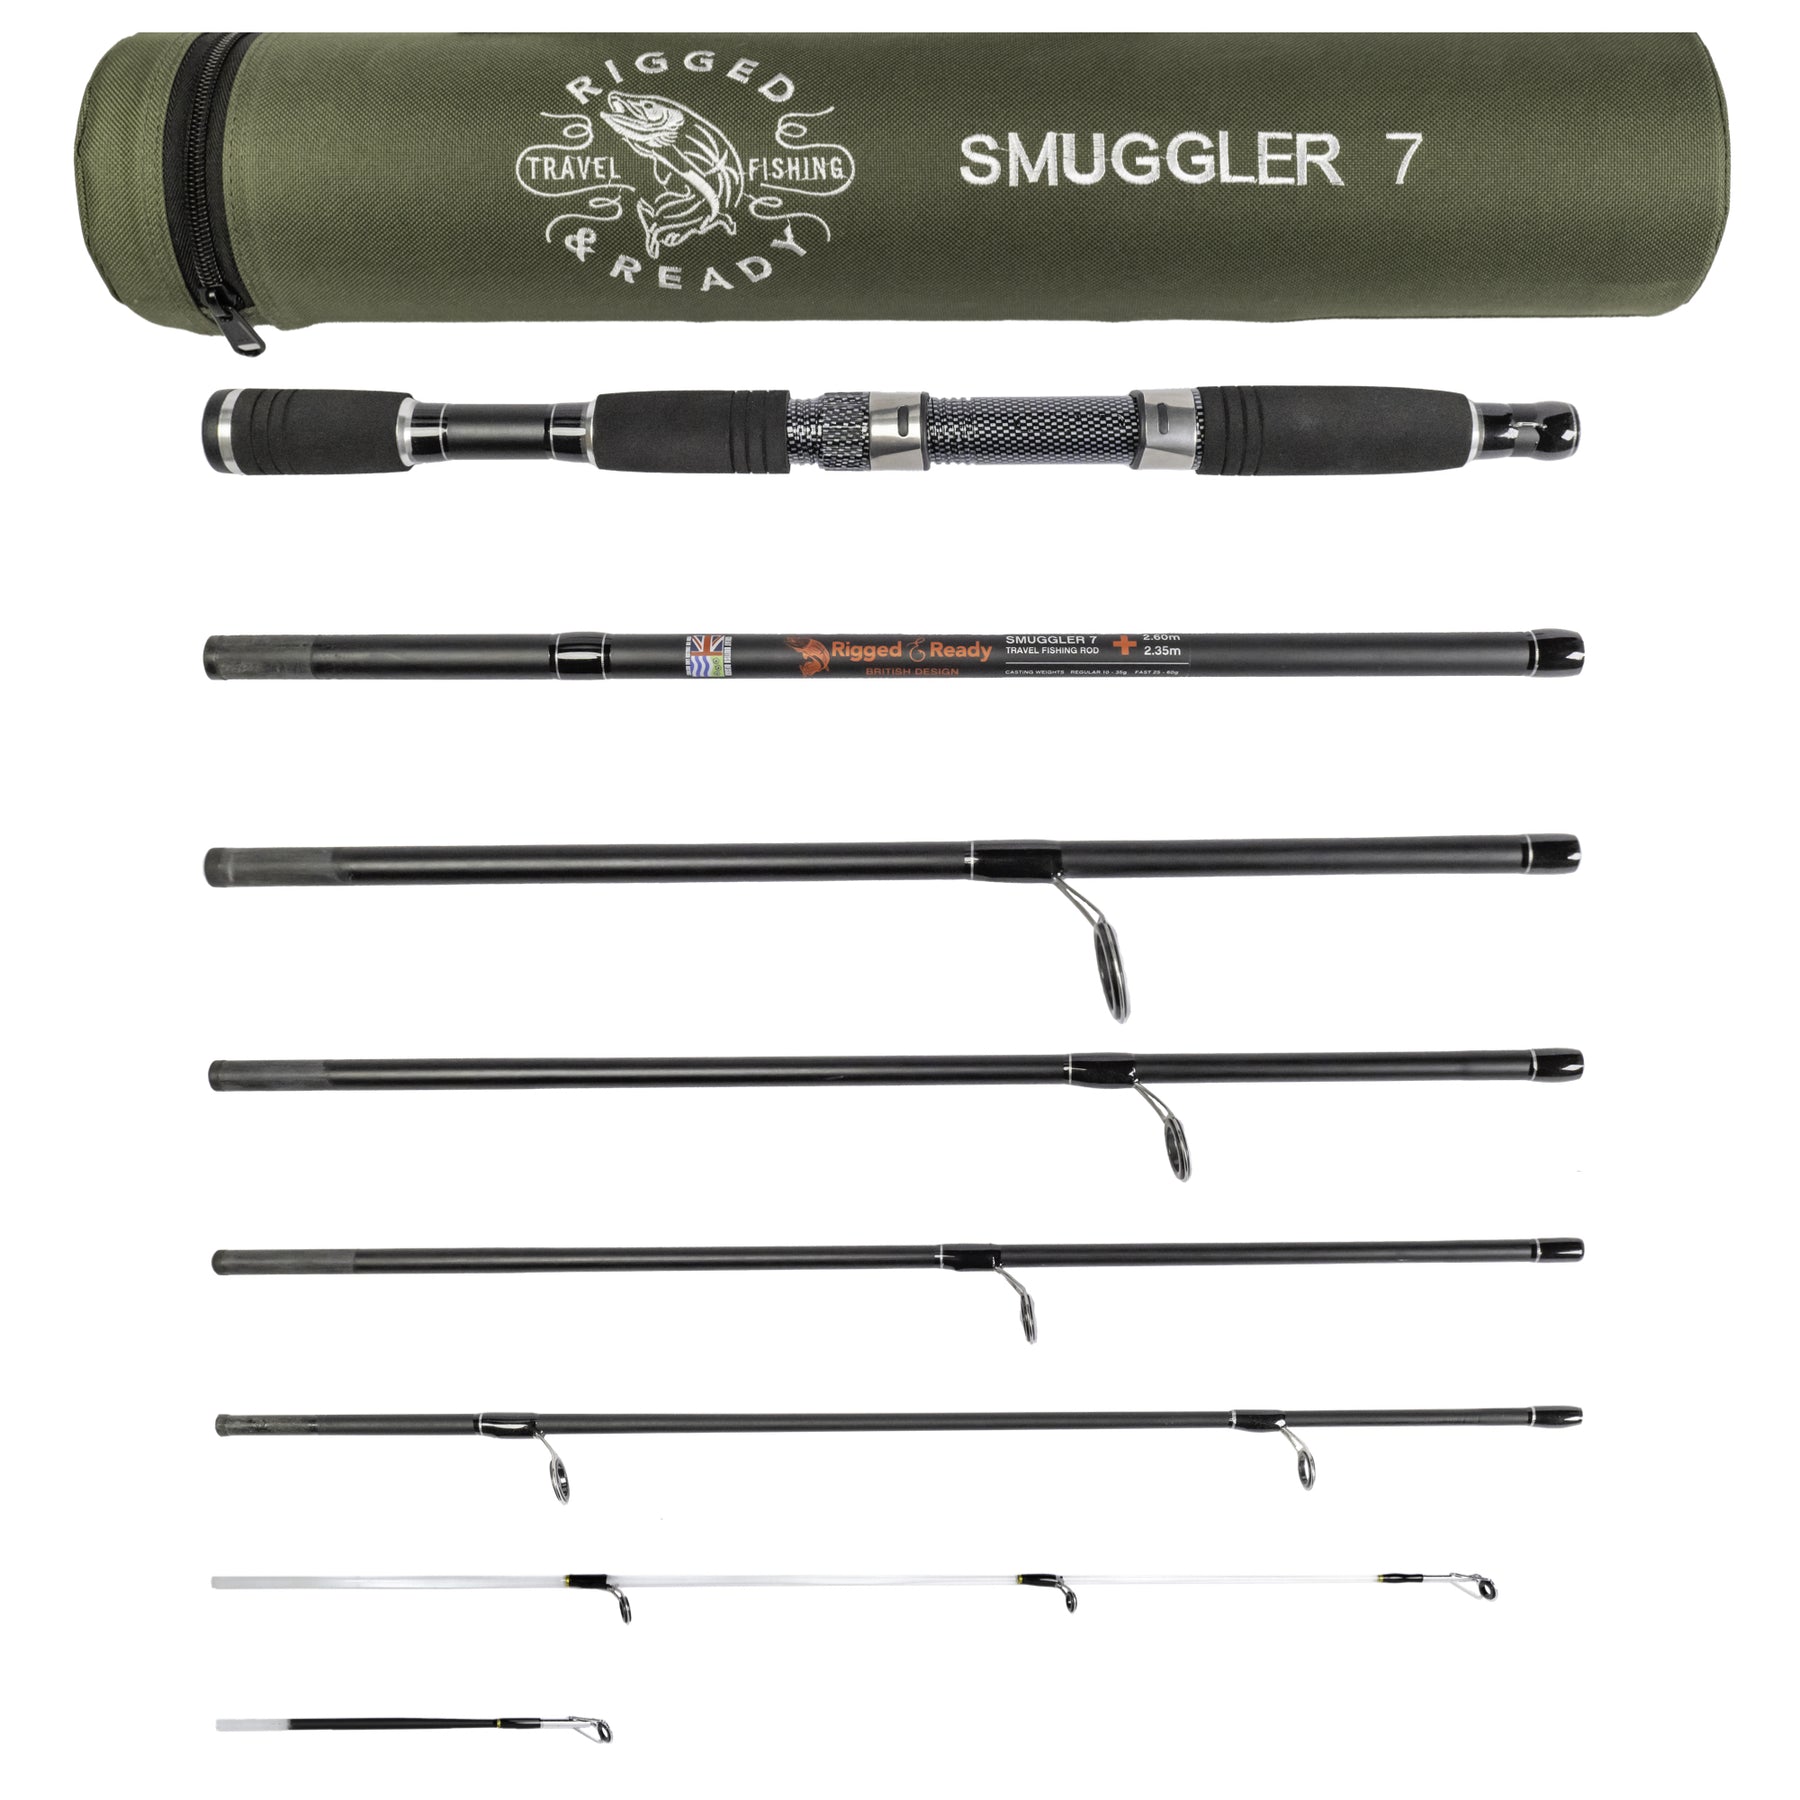 Smuggler 7 260+235cm Super Compact Travel fishing Rod + 2 Tips – Rigged and  Ready